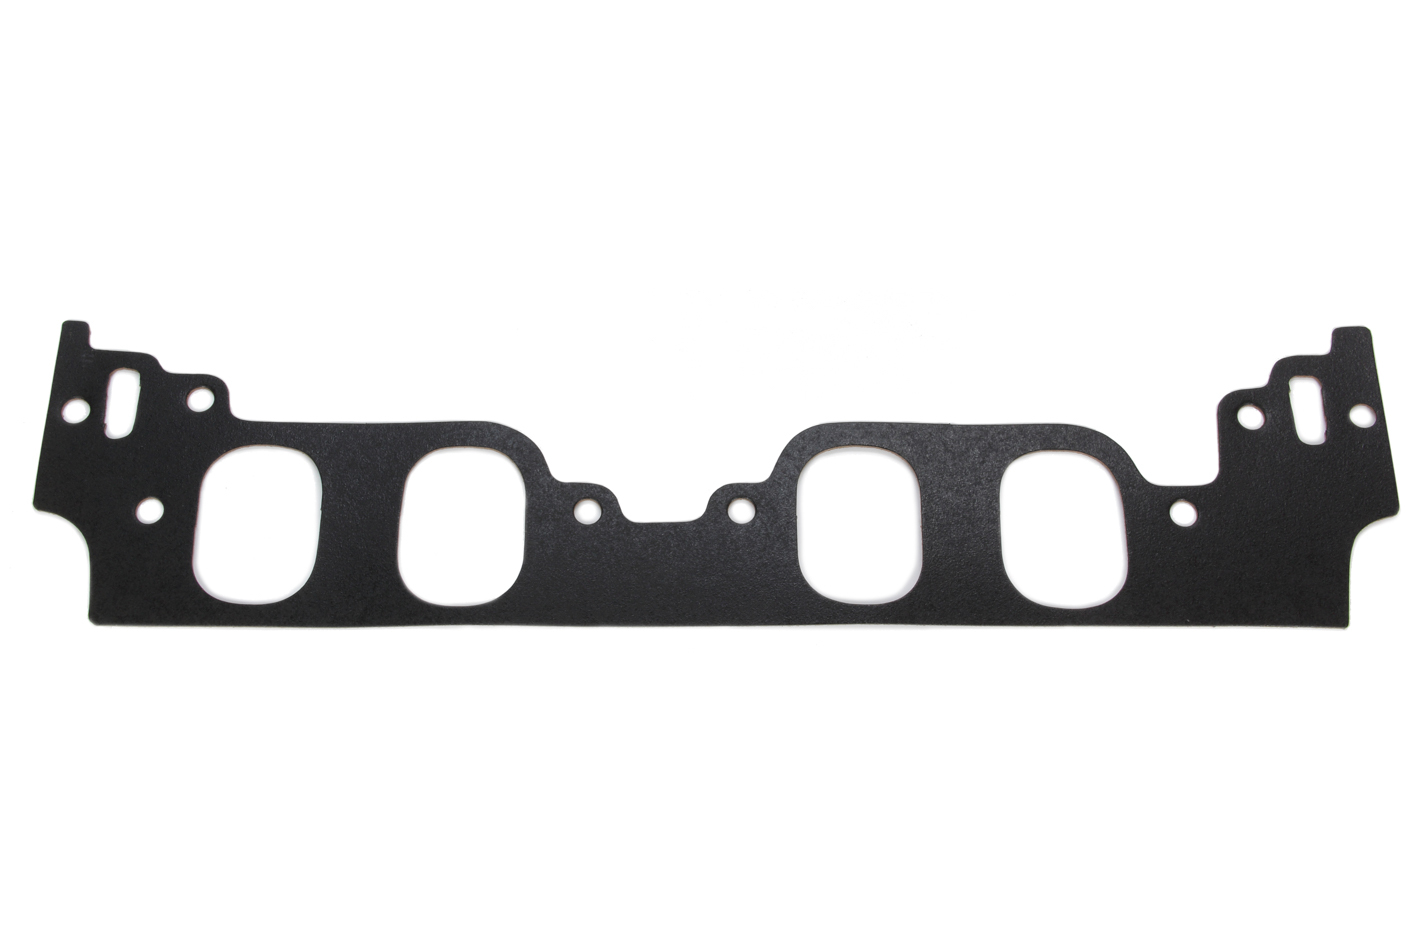 Brodix MG9001 - Intake Manifold Gasket, 0.060 in Thick, Rubber Coated Composite, 2.020 x 2.741 in Oval Port, DN-9 Series Cylinder Head, Big Block Chevy, Each